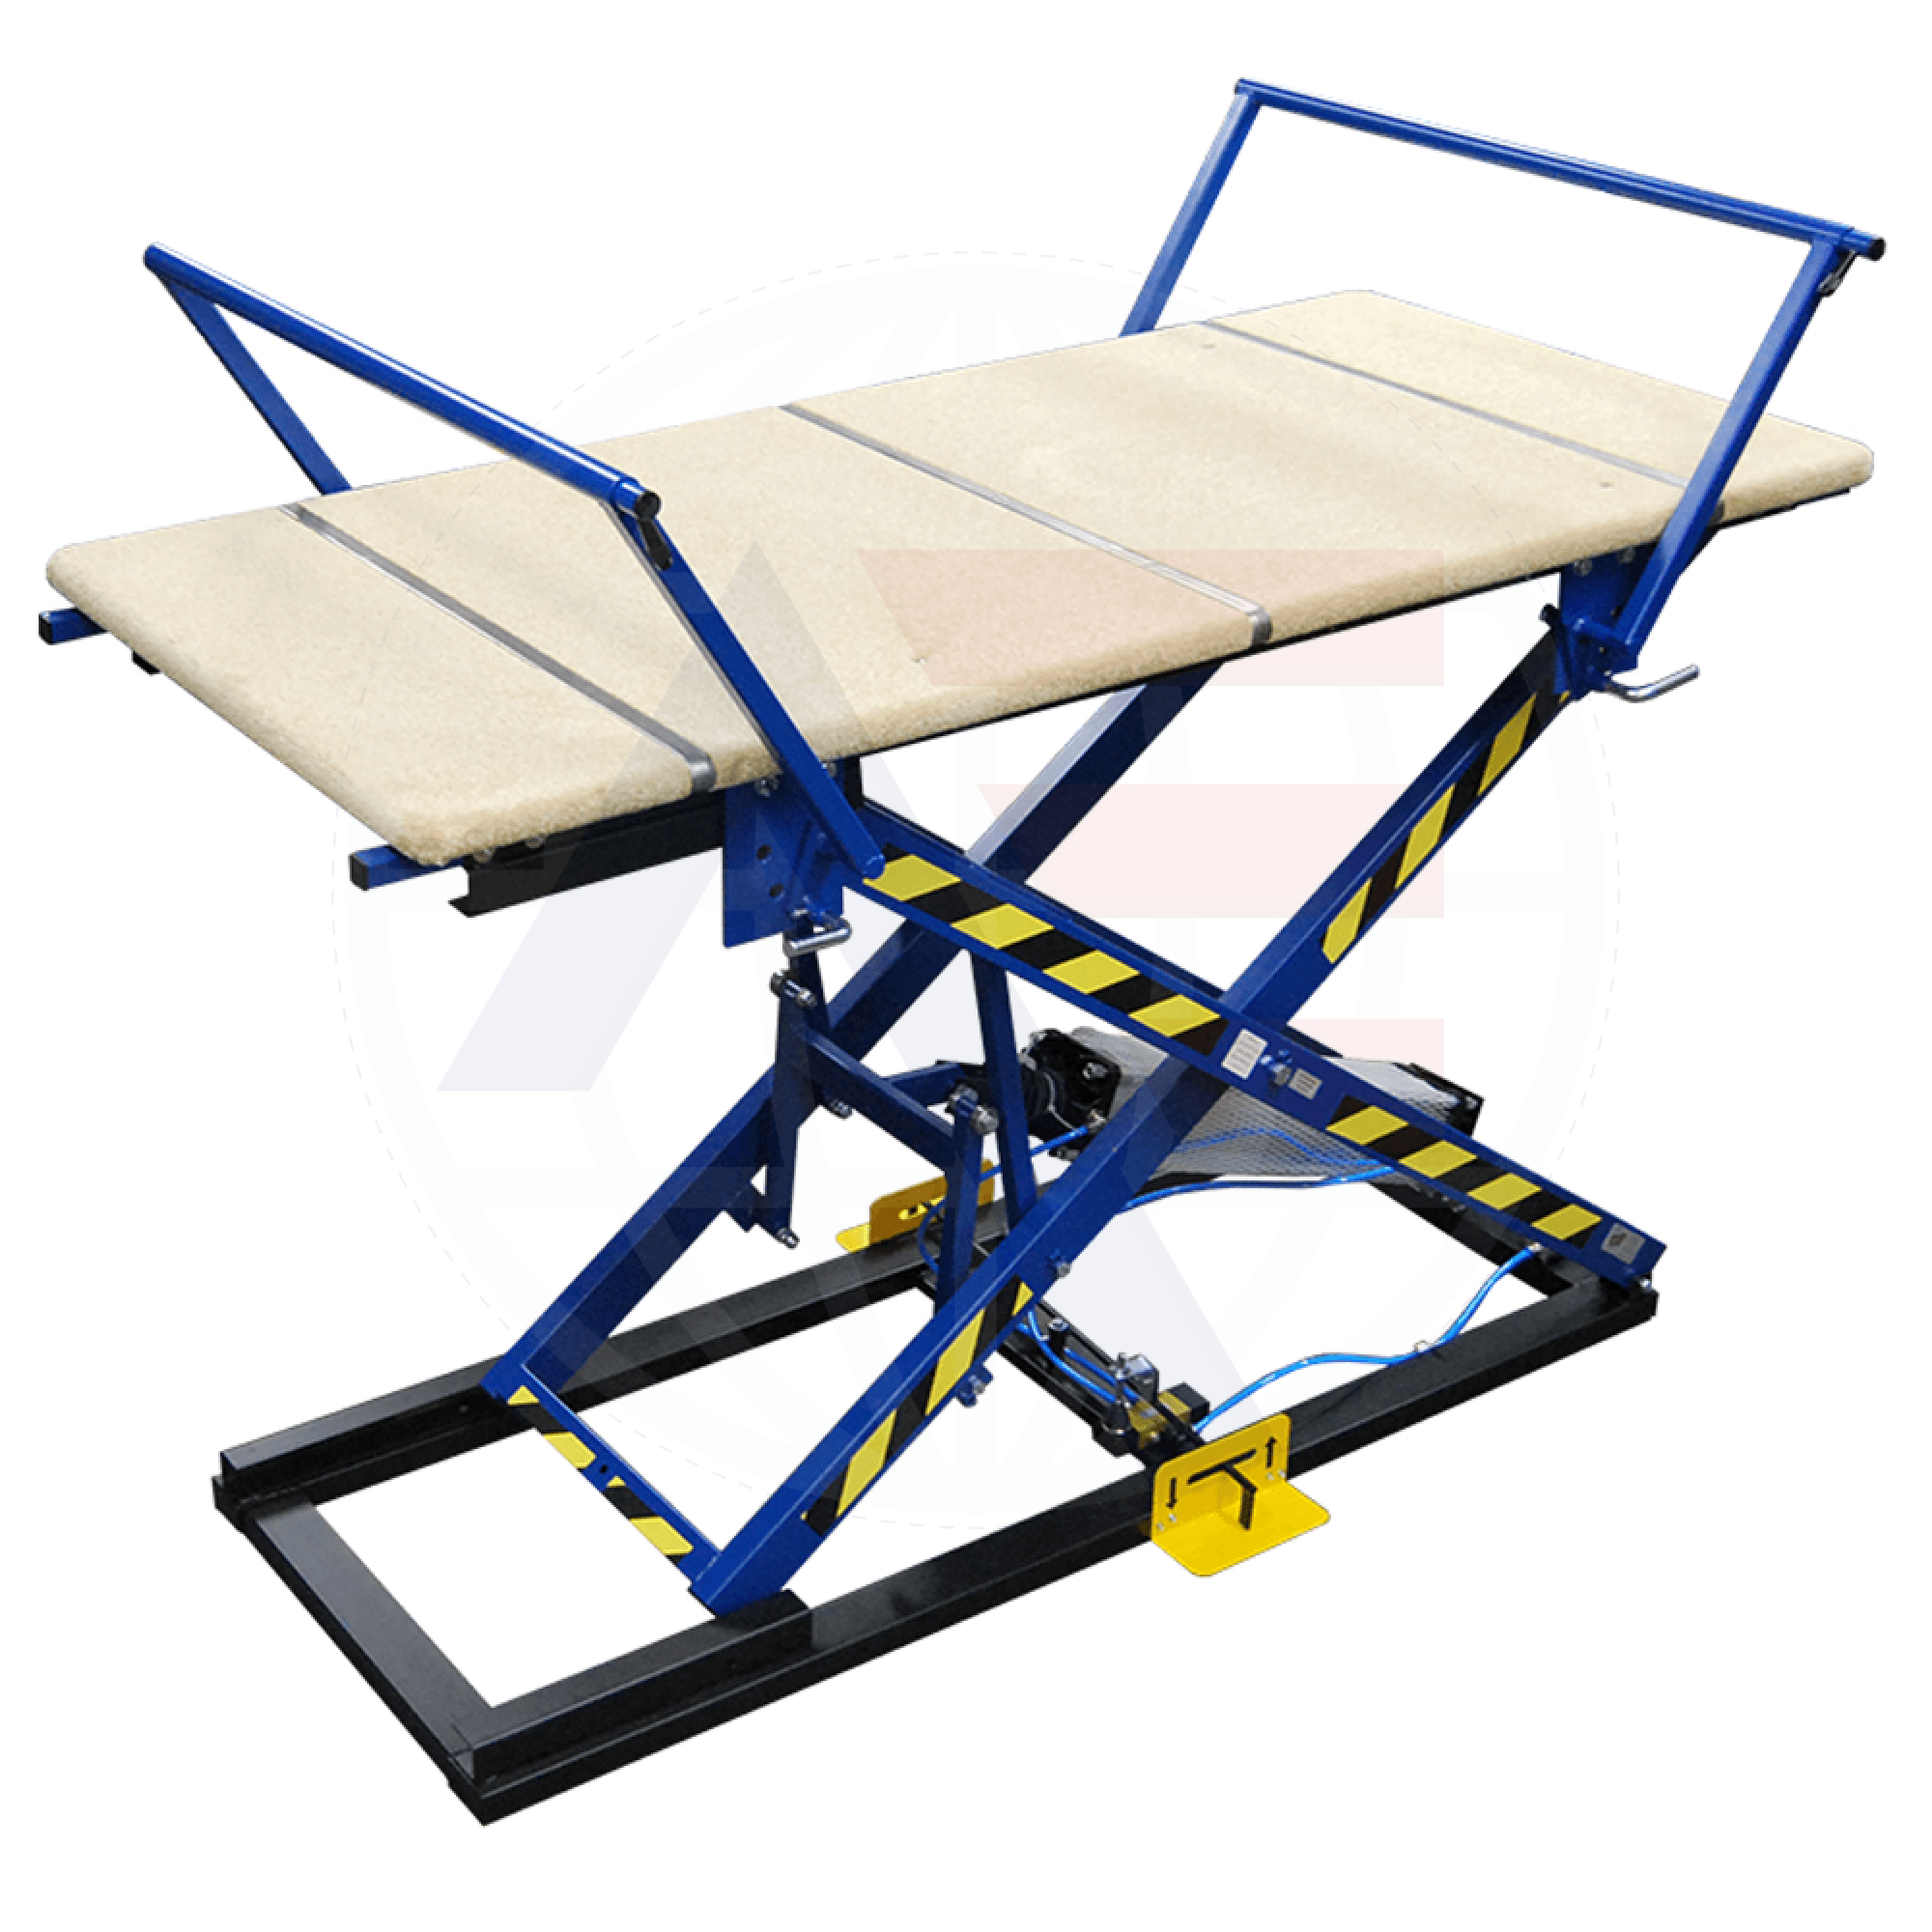 Rexel St-3/r Pneumatic Lifting Table Tables